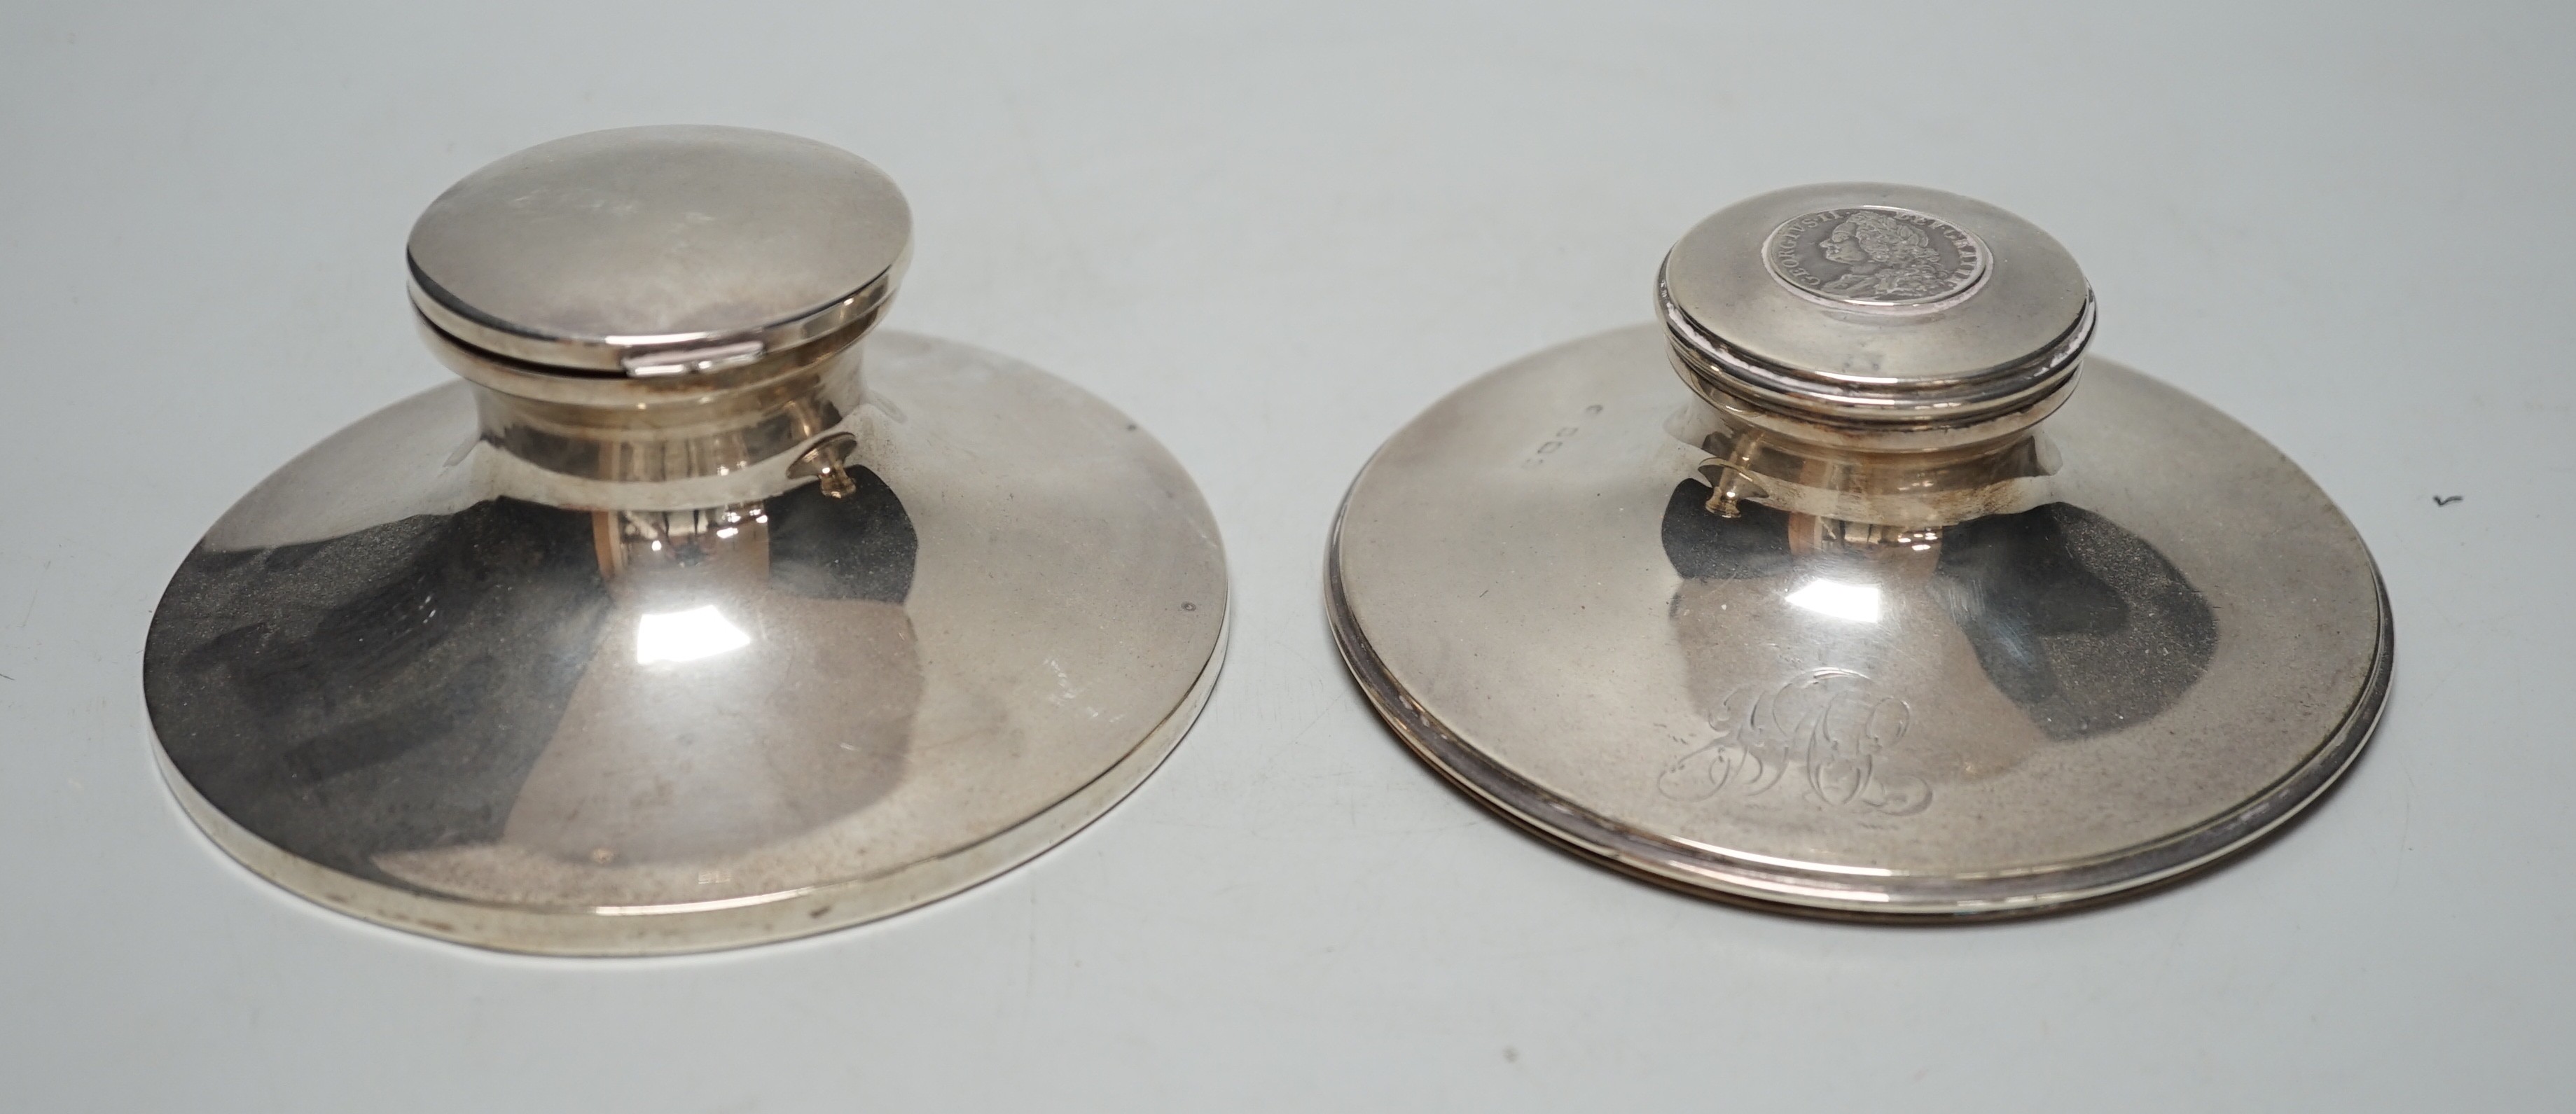 A George V silver mounted capstan inkwell, by Mappin & Webb, London, 1916, diameter 13.6cm and one other silver mounted capstan inkwell.                                                                                    